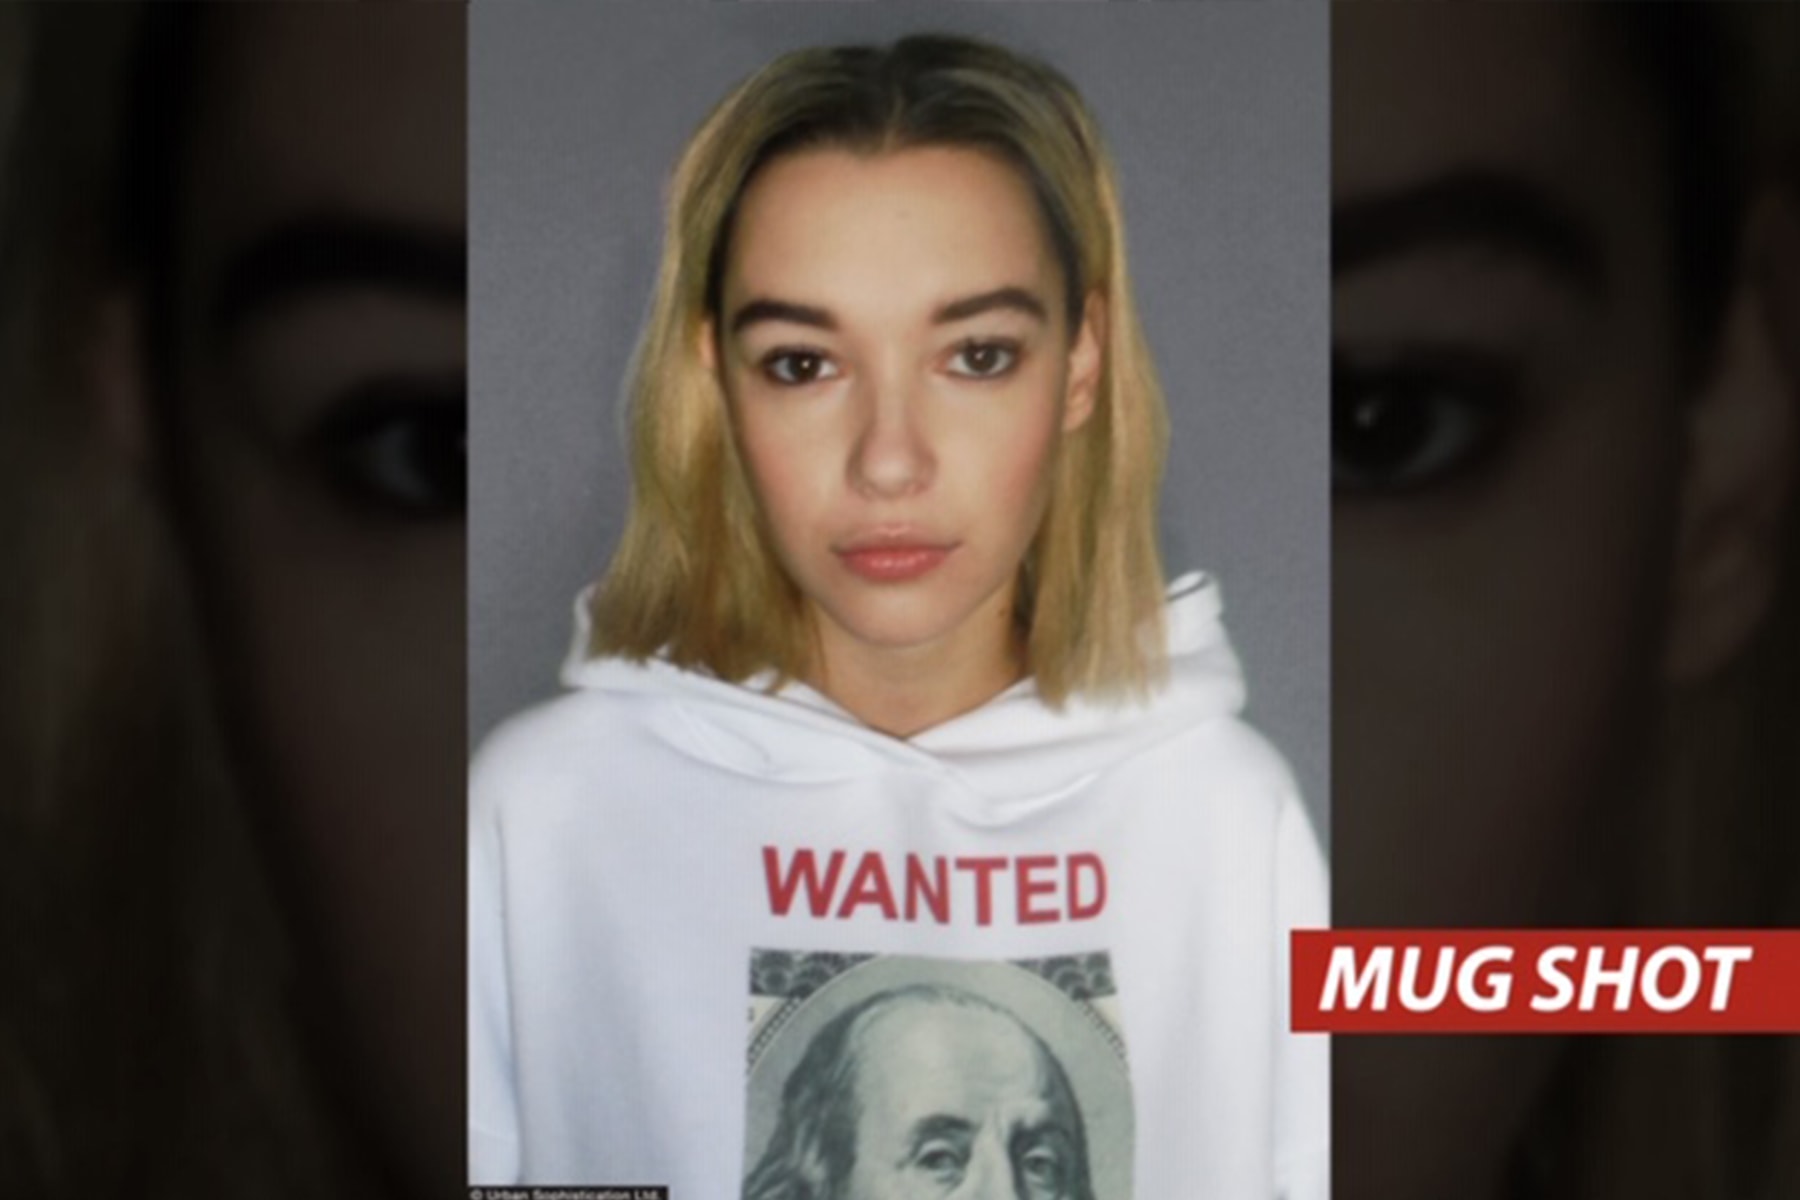 Urban Sophistication アーバンソフィスティケーション drops 最新 カプセル コレクション fame and fortune new capsule collection featured by サラ スナイダー sarah snyder paparazzi mugshot graduation picture unique theme 